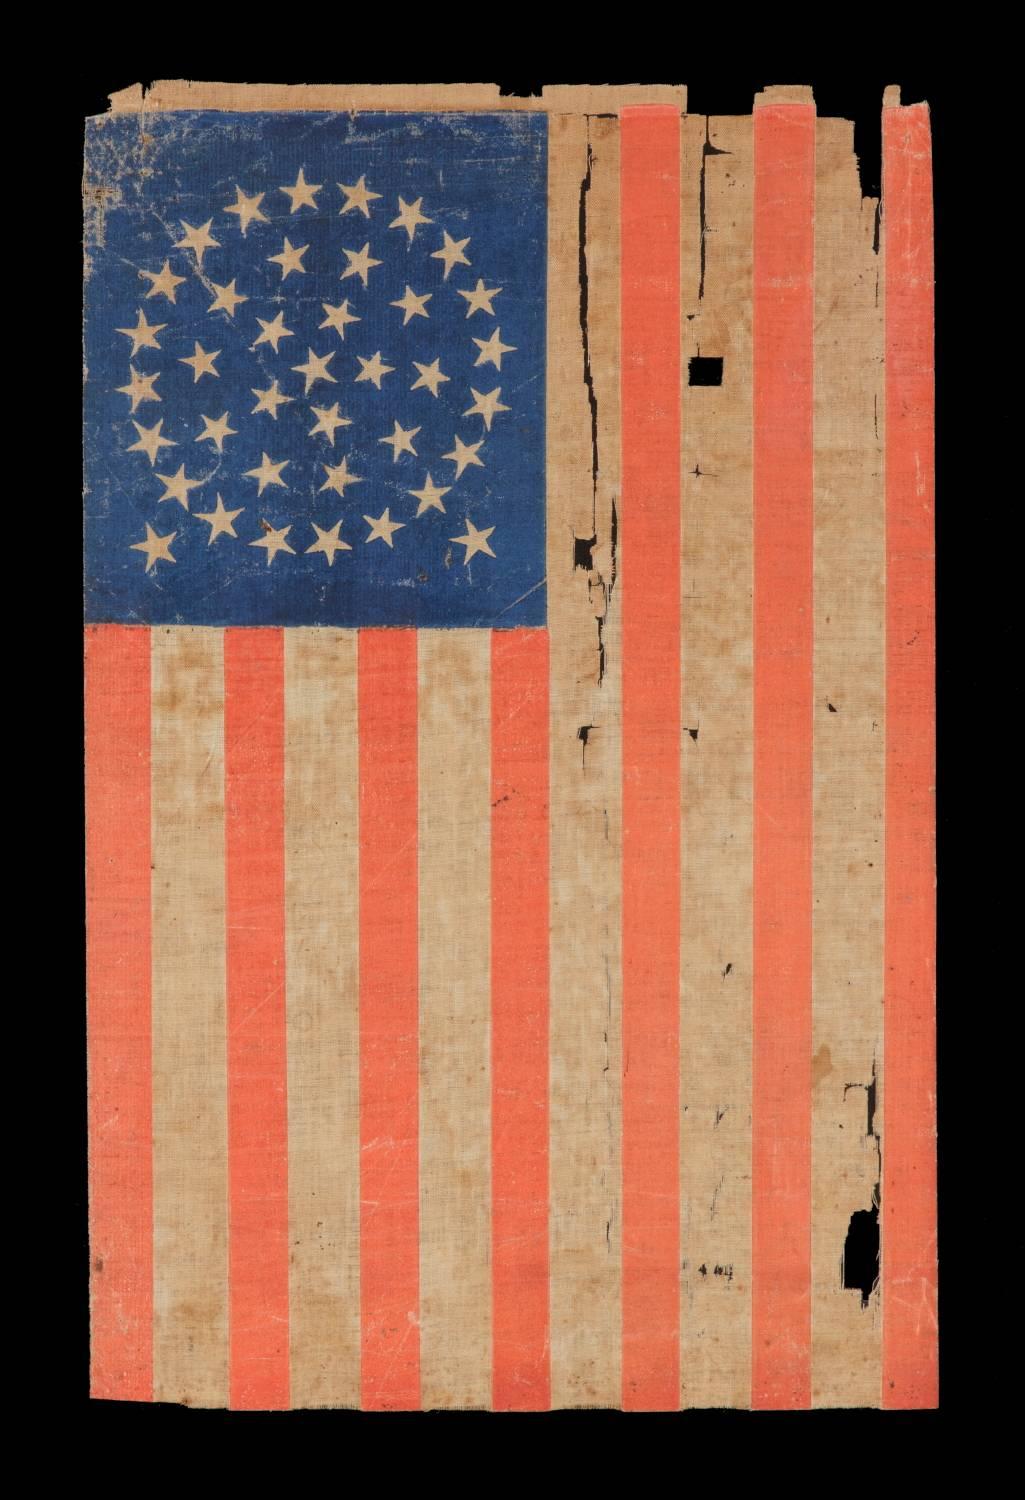 38 stars in a medallion configuration with two outliers, Colorado statehood, 1876-1889, a well-worn example with bold coloration:

38 star American parade flag, block-printed by hand on coarse, glazed cotton. The stars are arranged in a